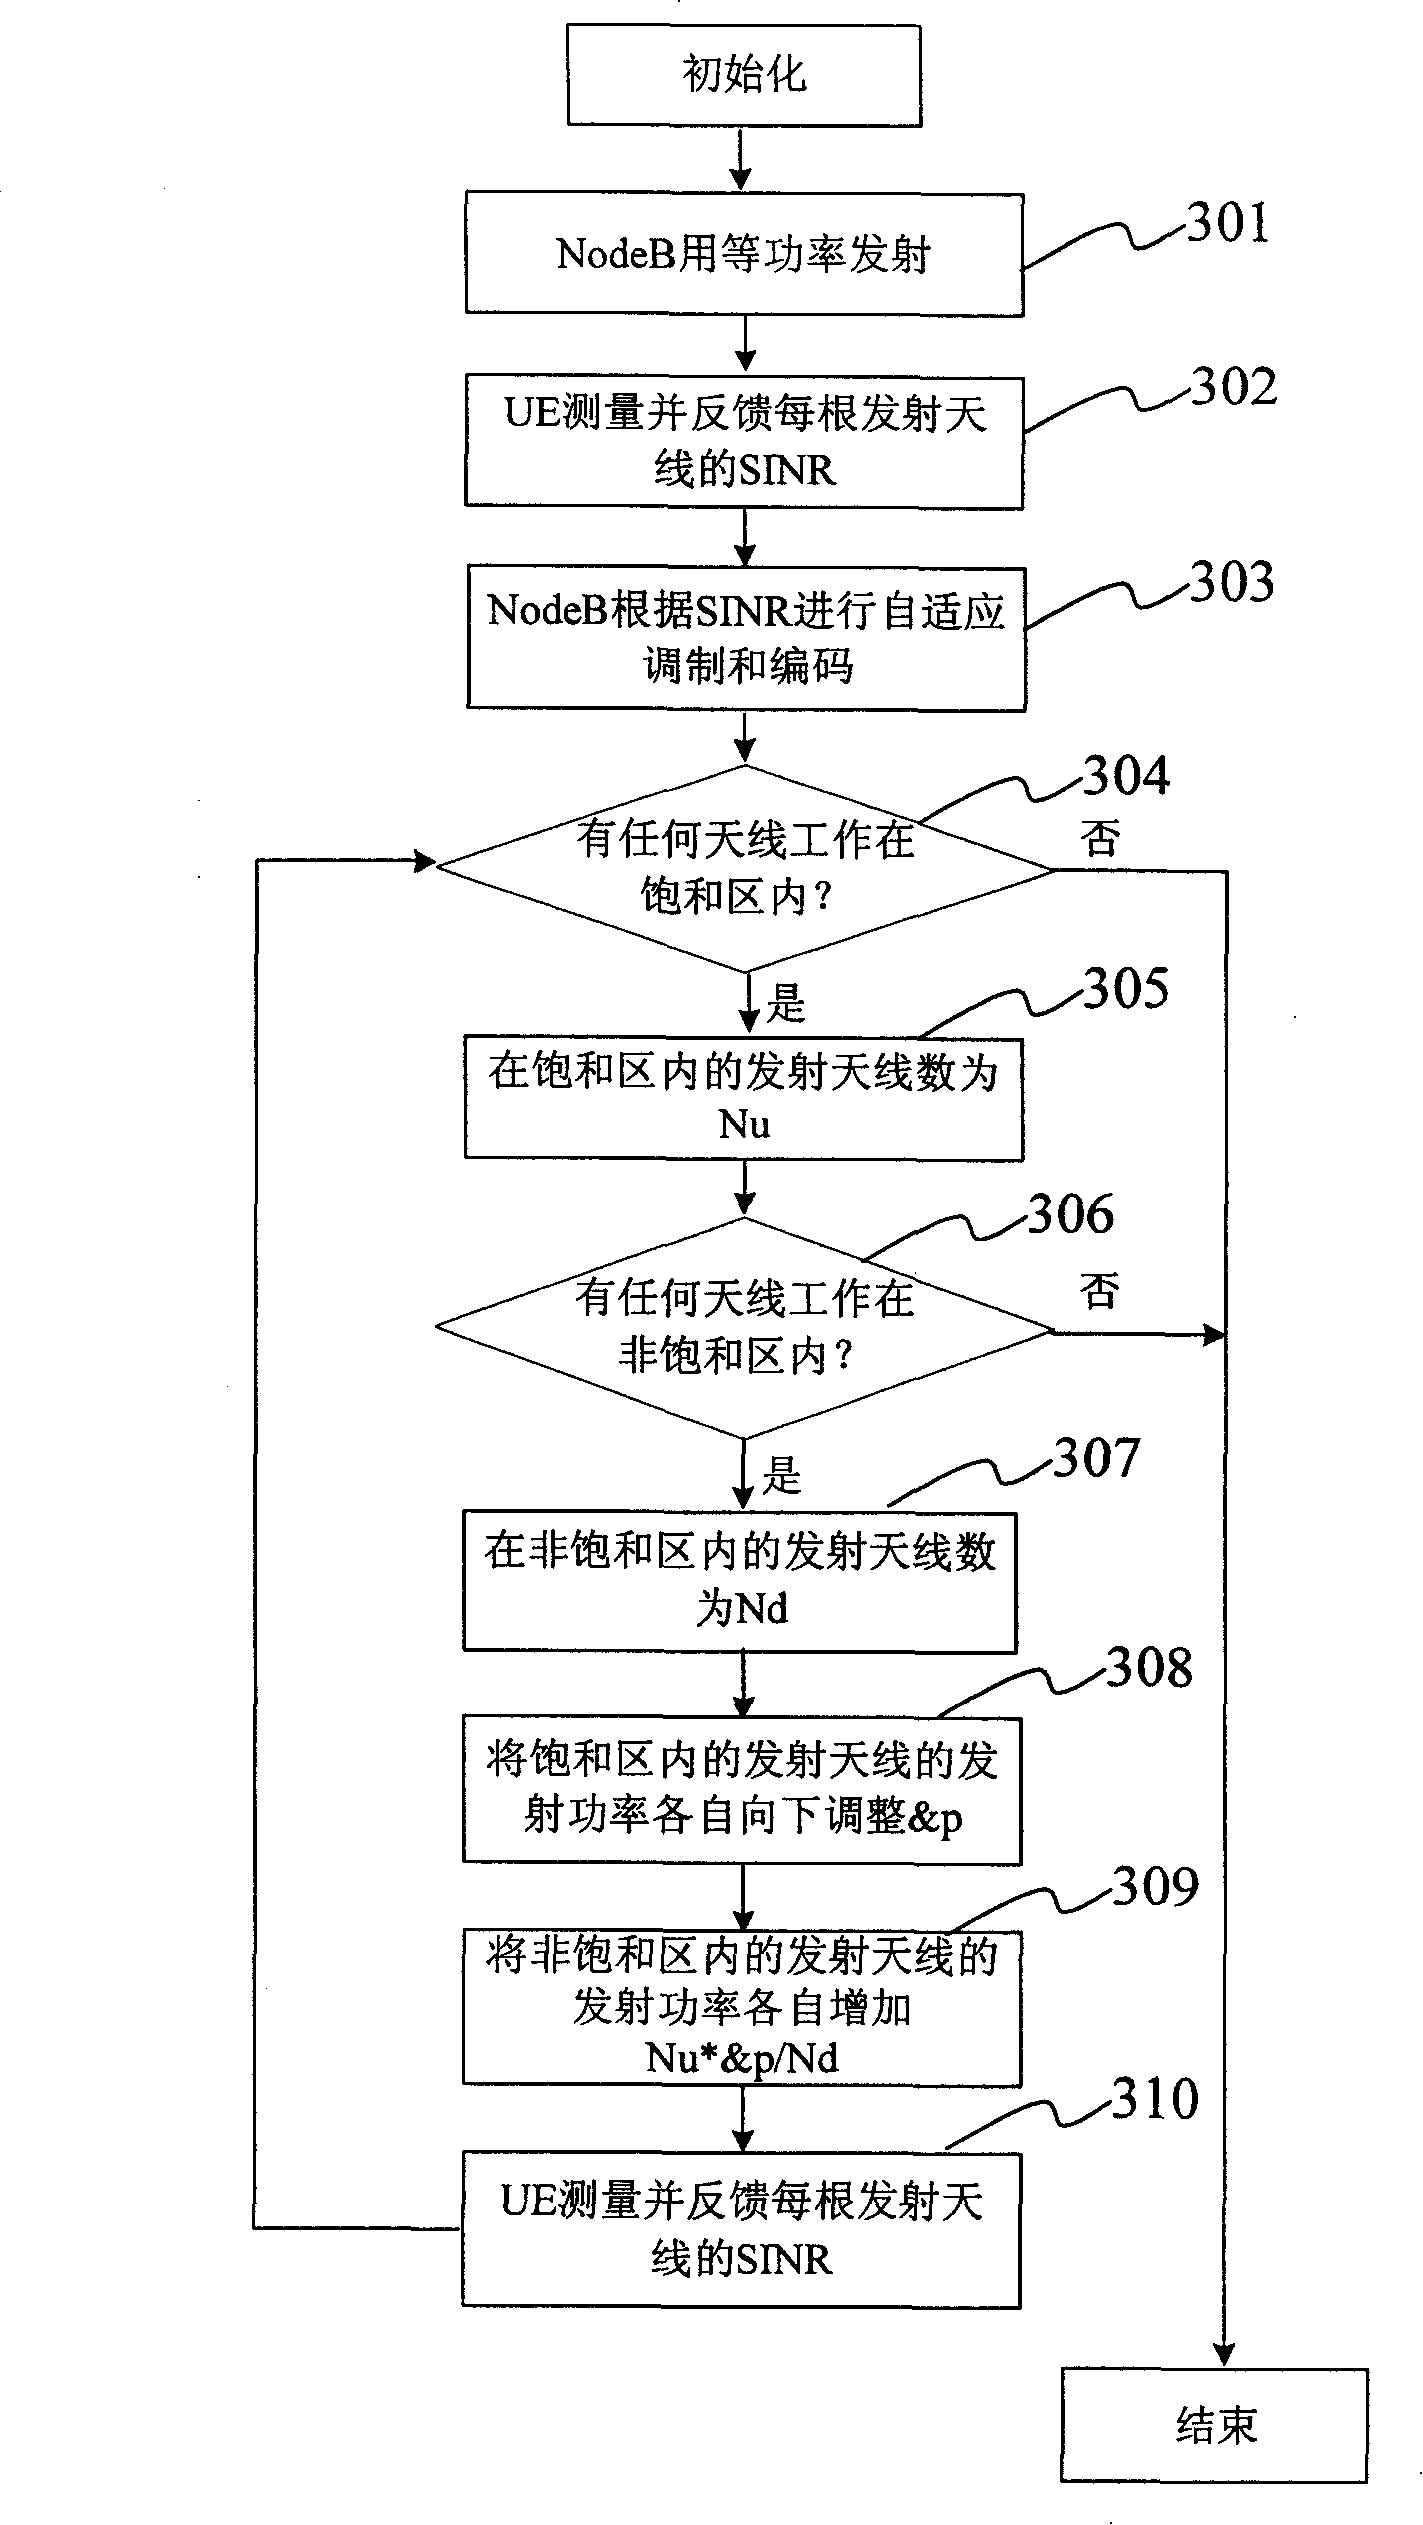 An antenna rate control method and system